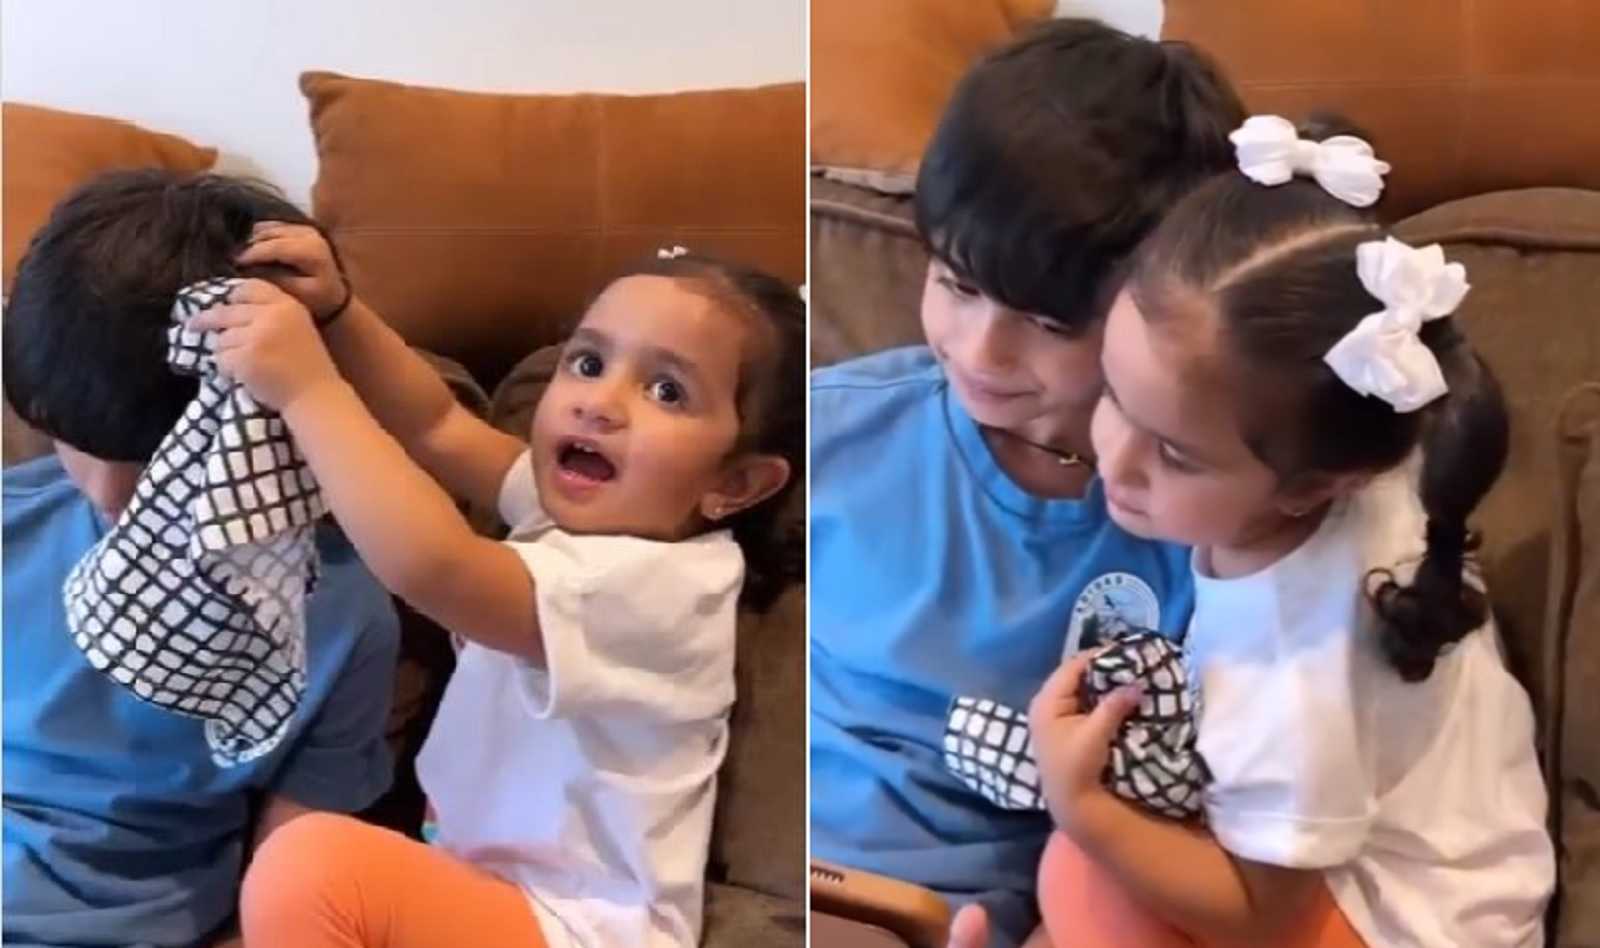 Siblings Day: Shilpa Shetty's daughter Samisha applying ice on brother Viaan's wound is the cutest thing on the internet today